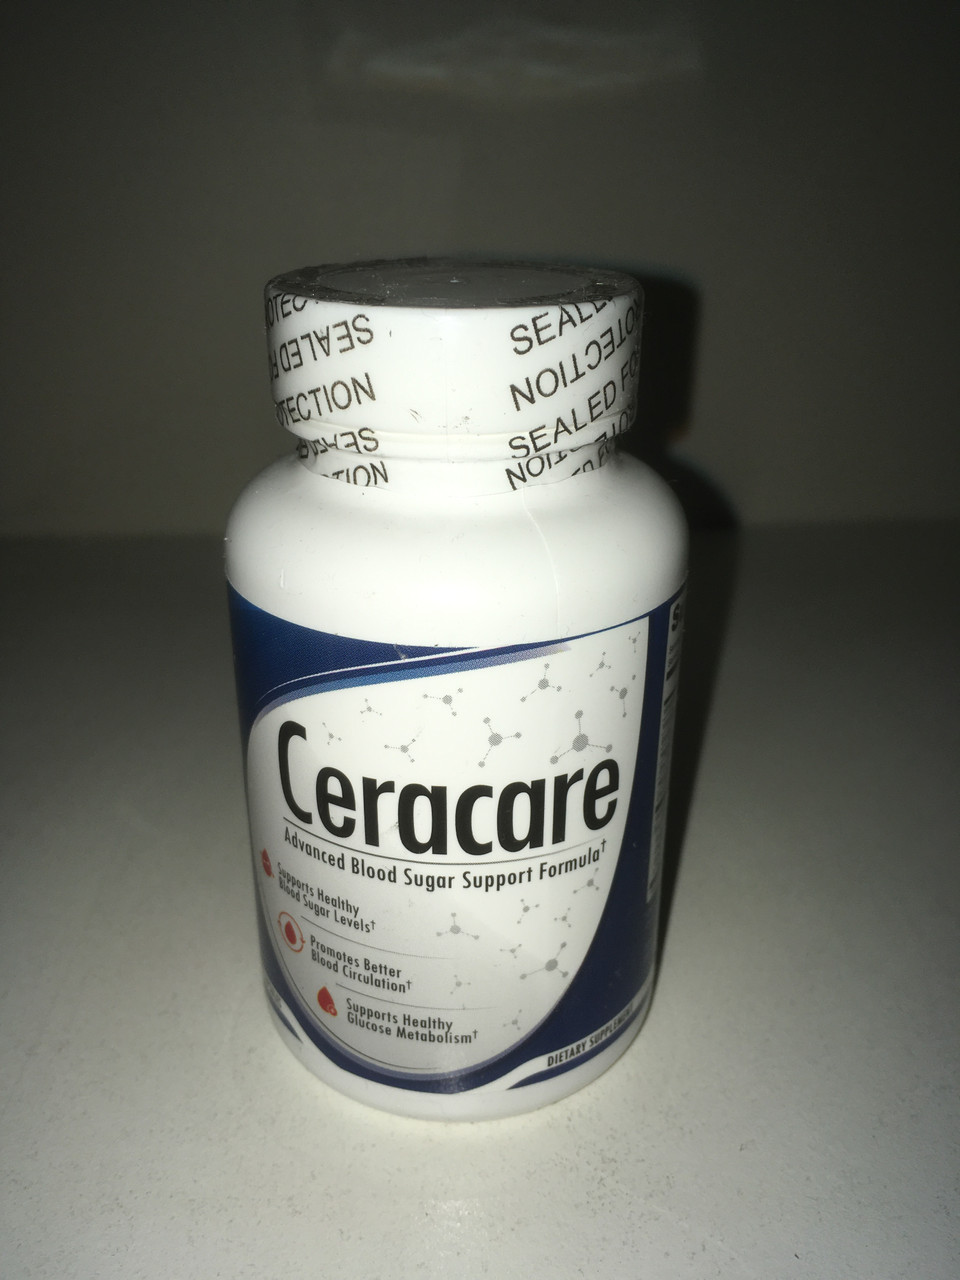 Ceracare Advanced Blood Sugar Support